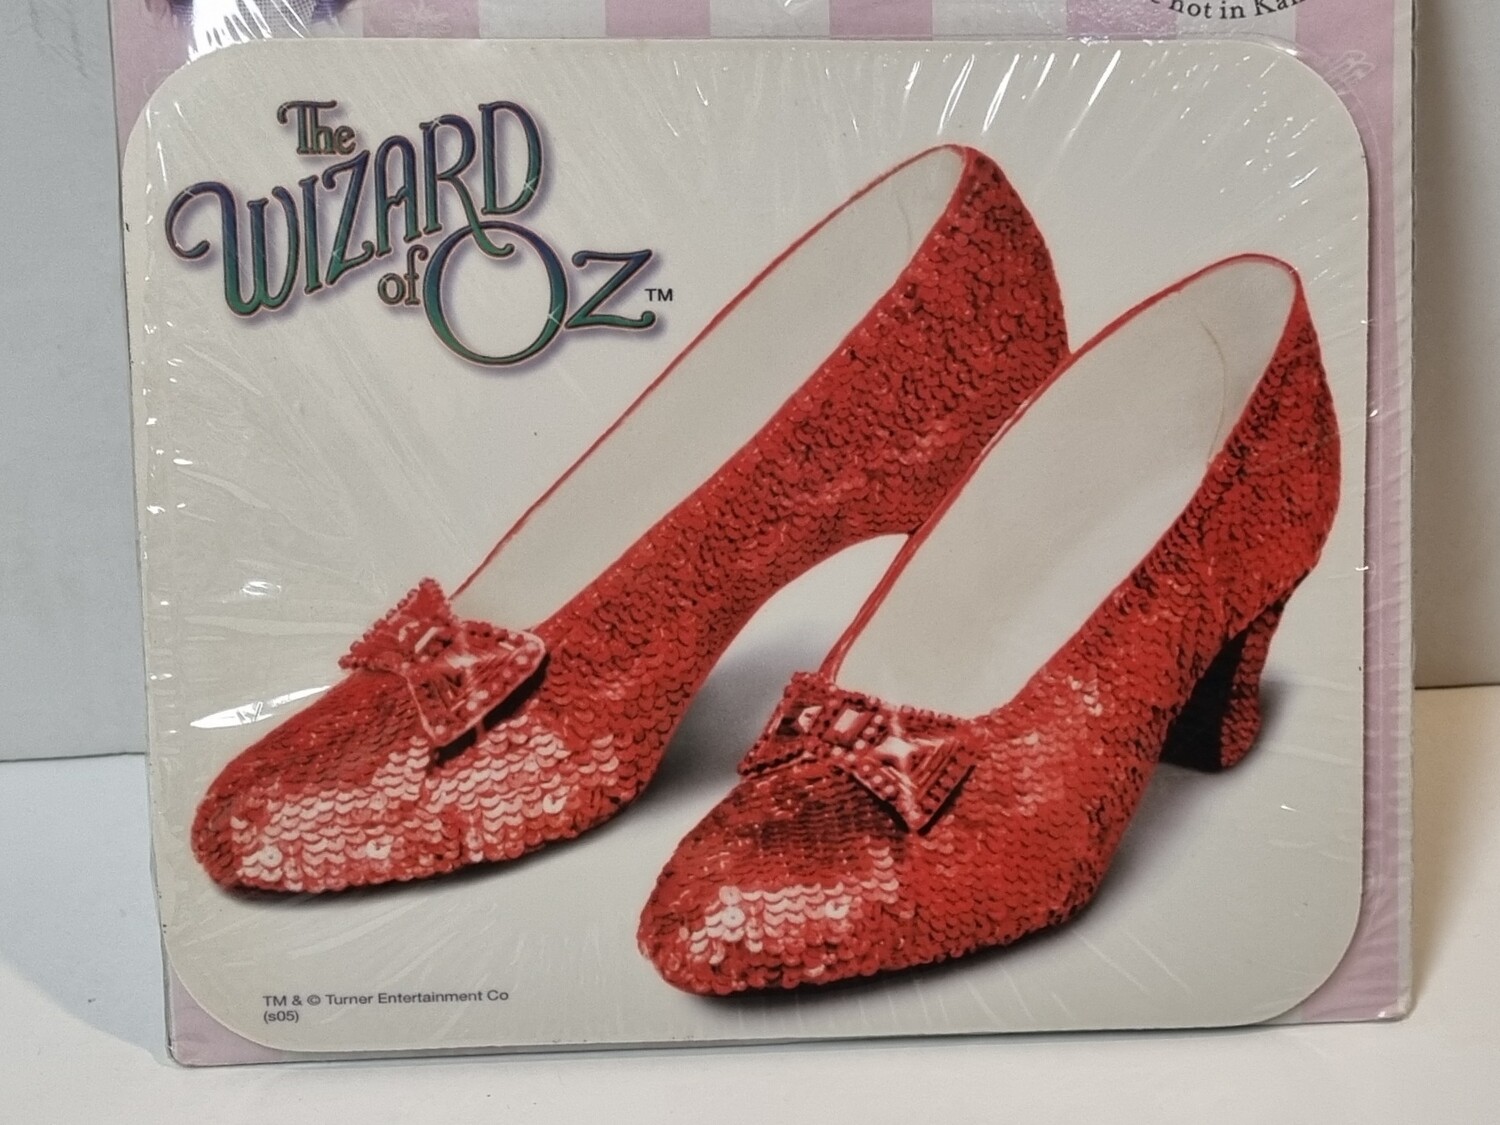 Mousepad / Muismat, The Wizard of Oz, Dorothy's Ruby Slippers